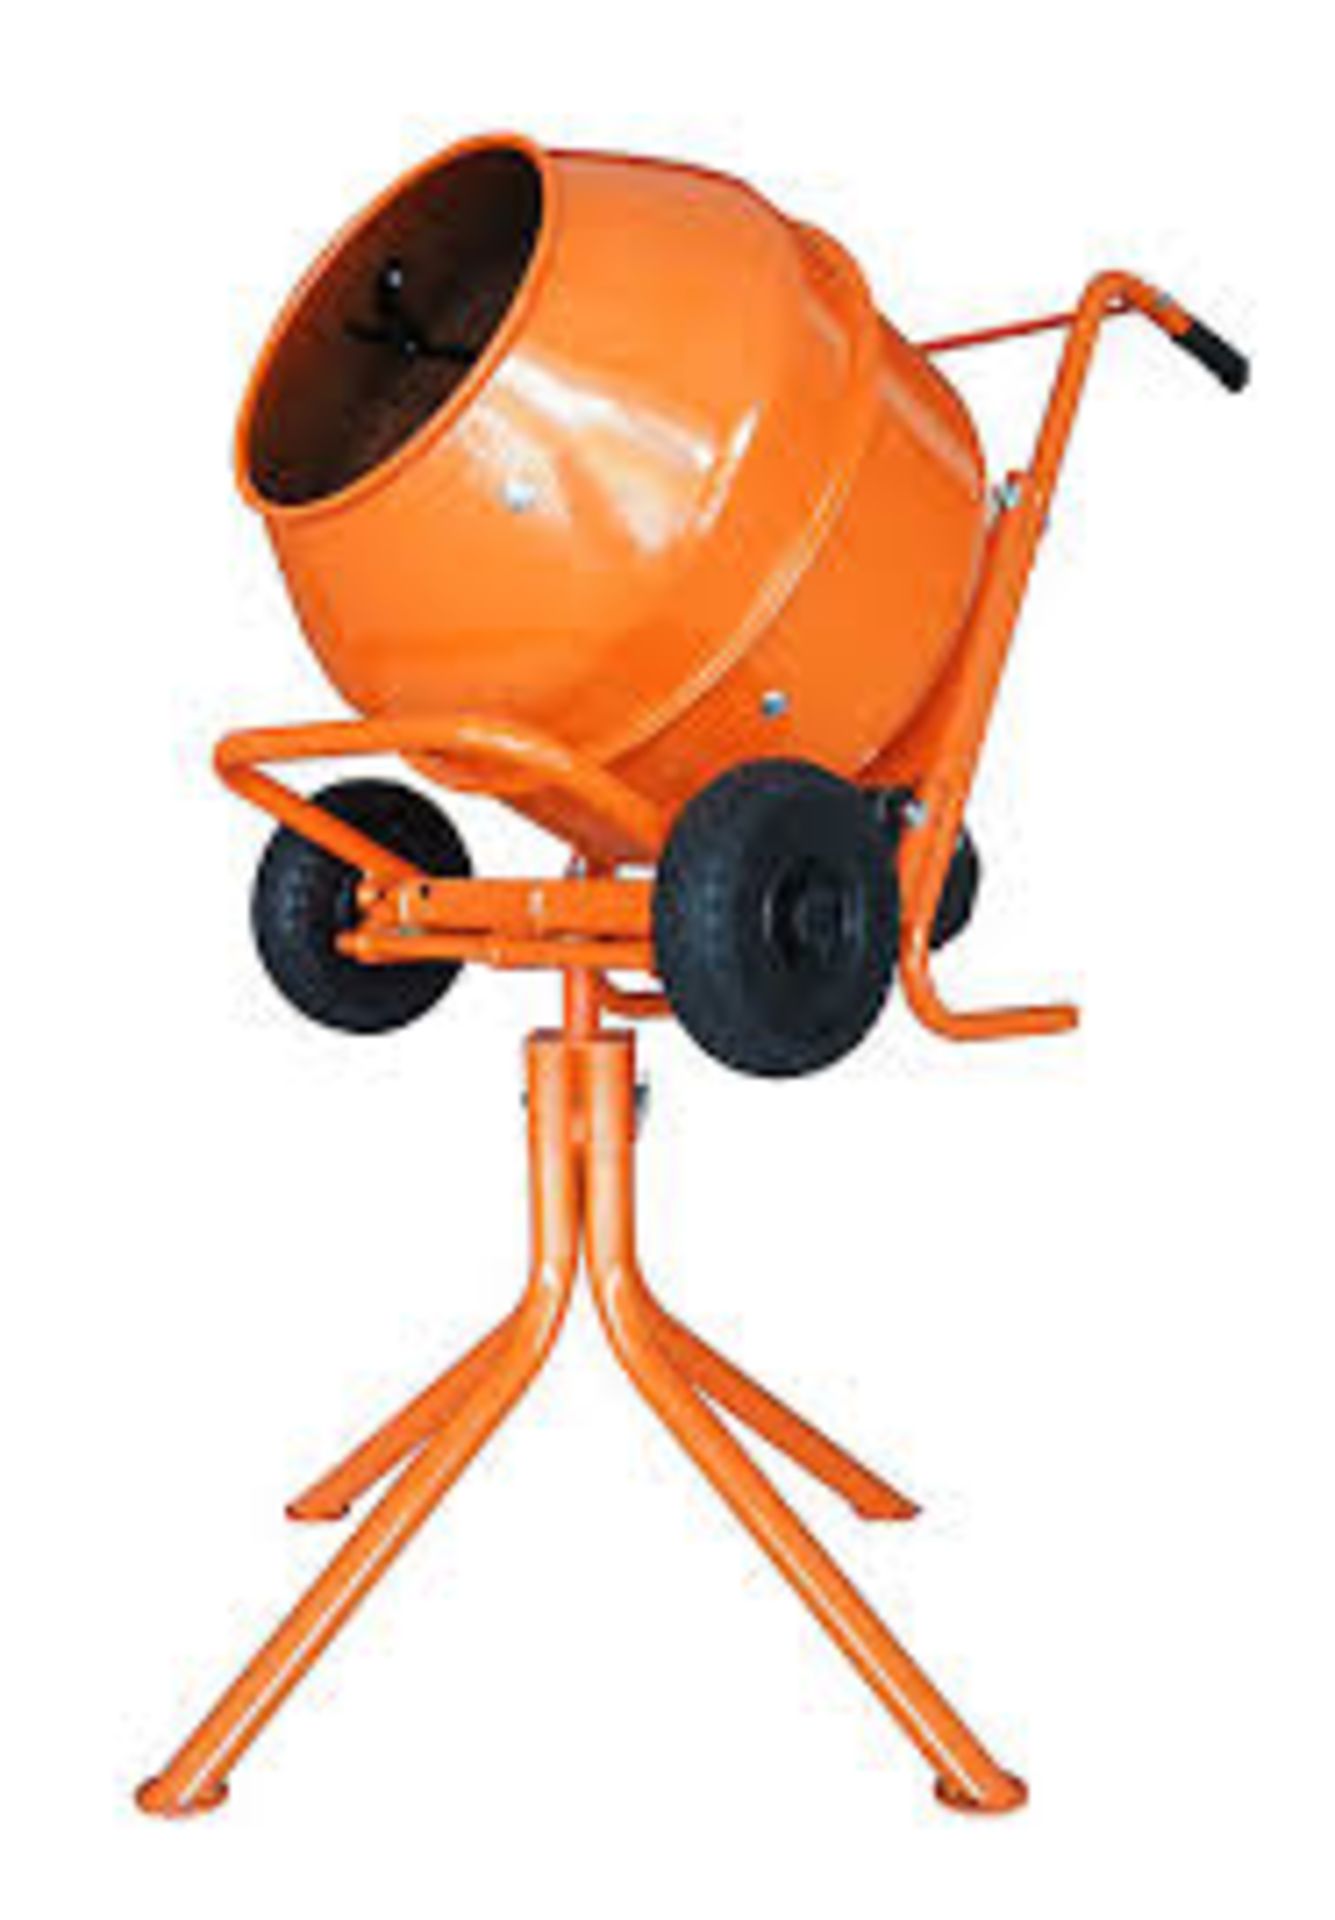 Build Buddy 370W 230V Cement mixer 134L. - R19.6. Ideal for mixing concrete and mortar, this